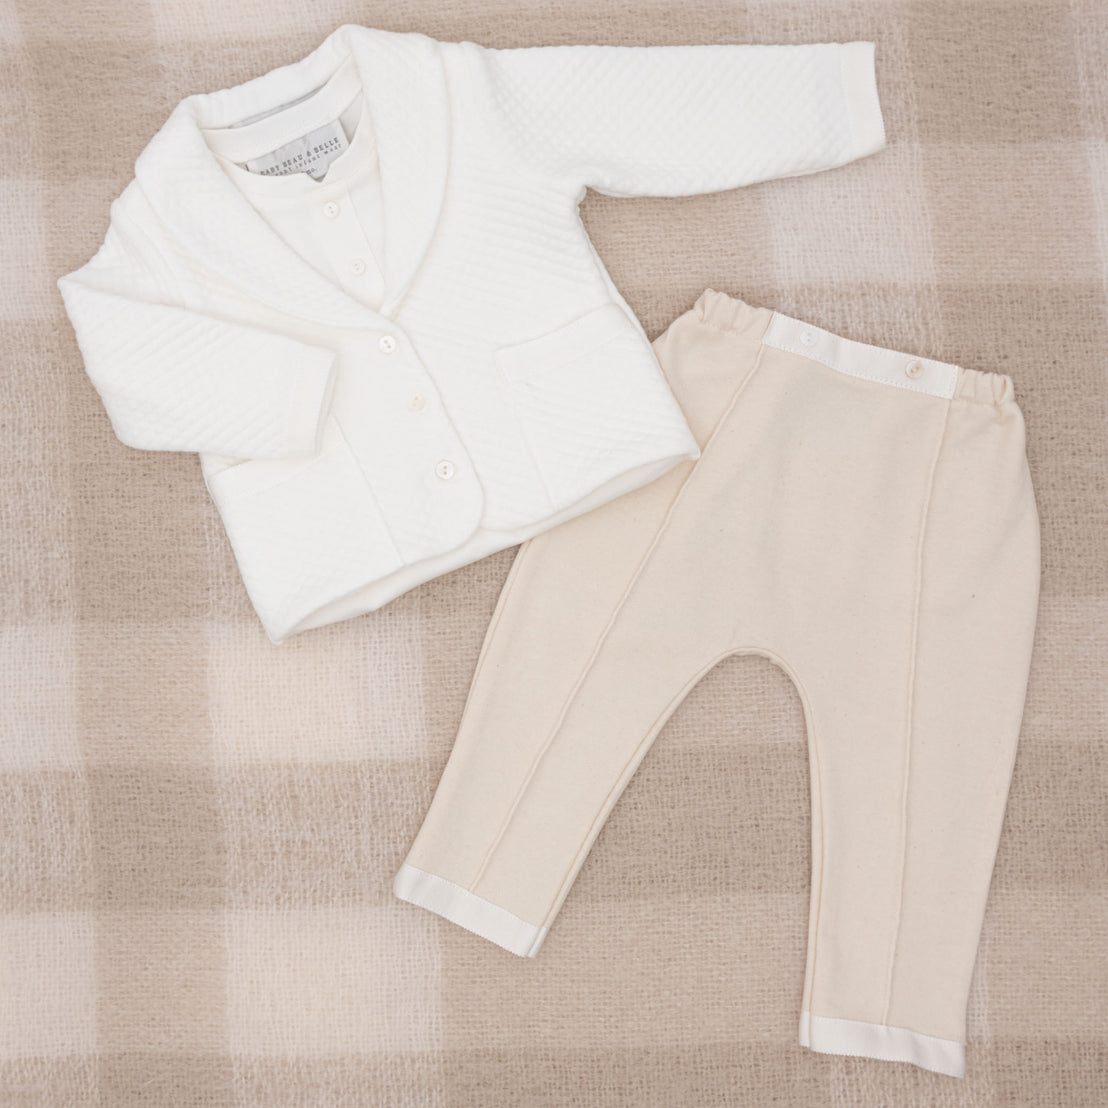 Flat lay photo of the Braden 3-Piece Suit, including the jacket, pants, and onesie